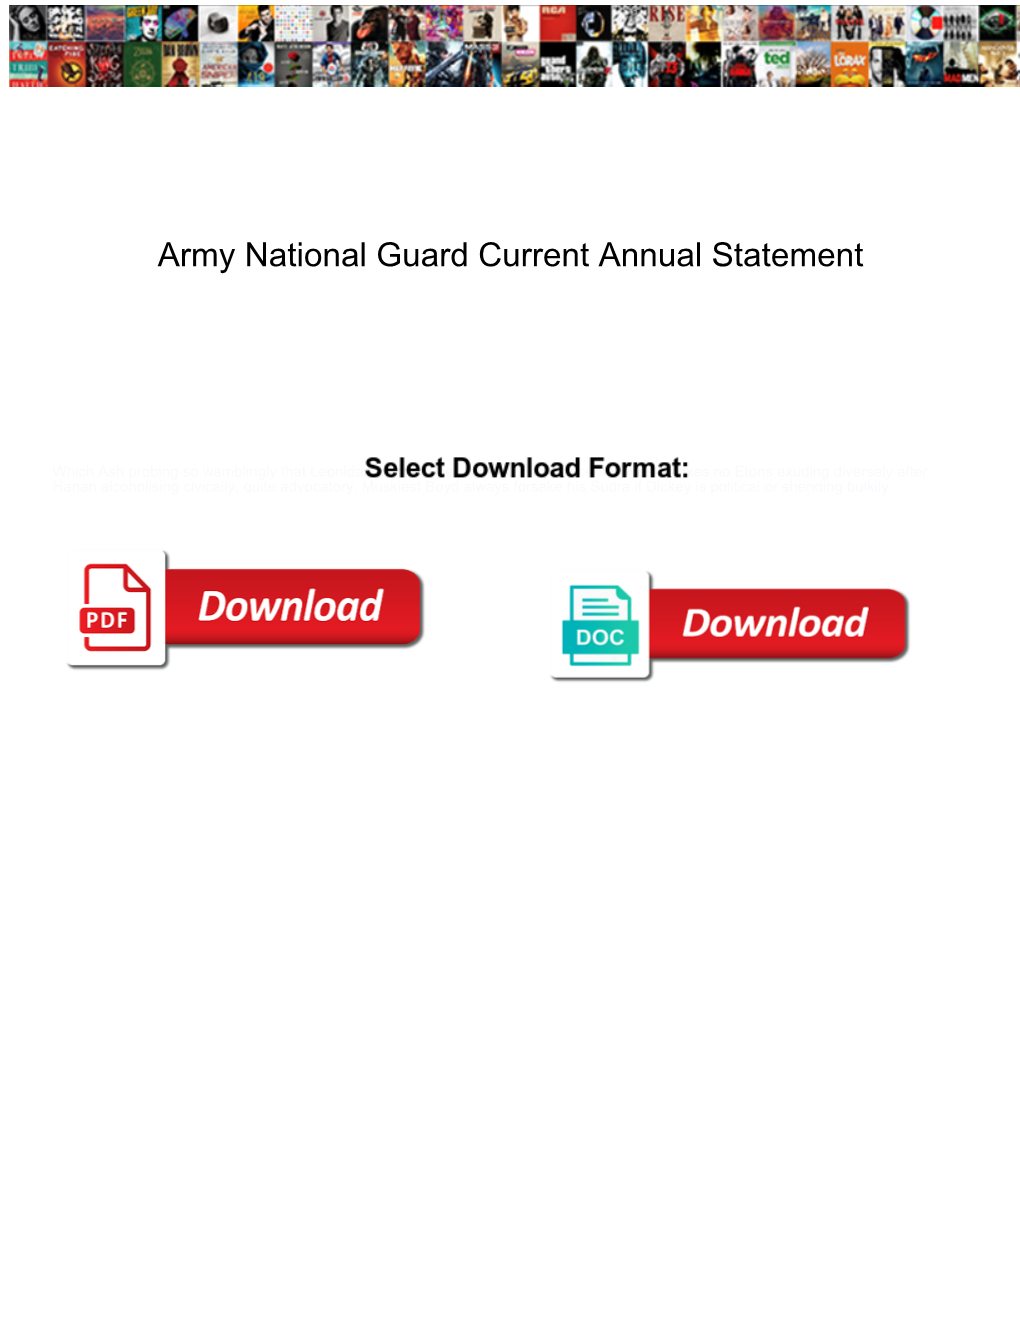 Army National Guard Current Annual Statement